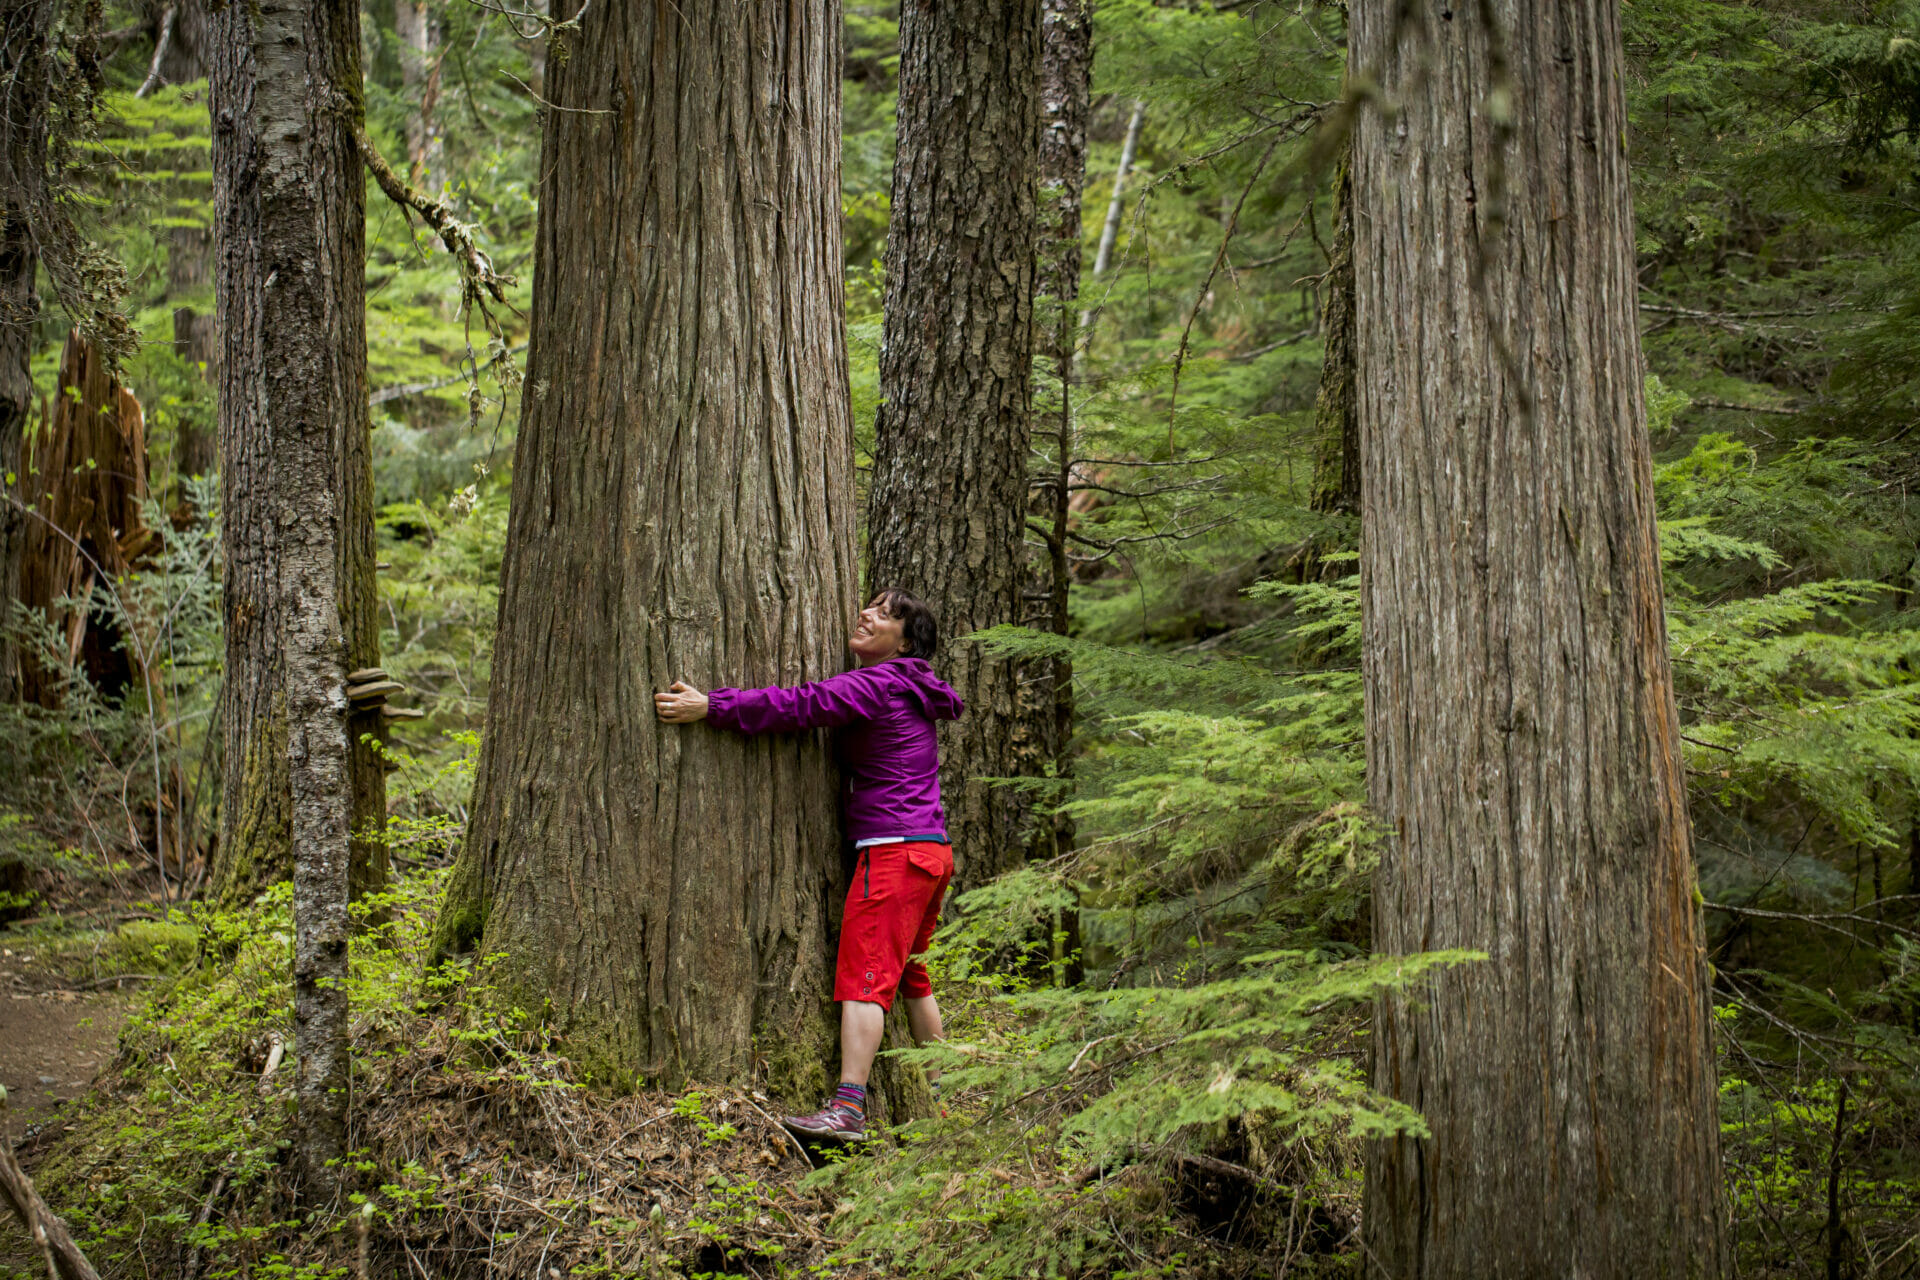 Tree hugging photo by Mike Crane/TW